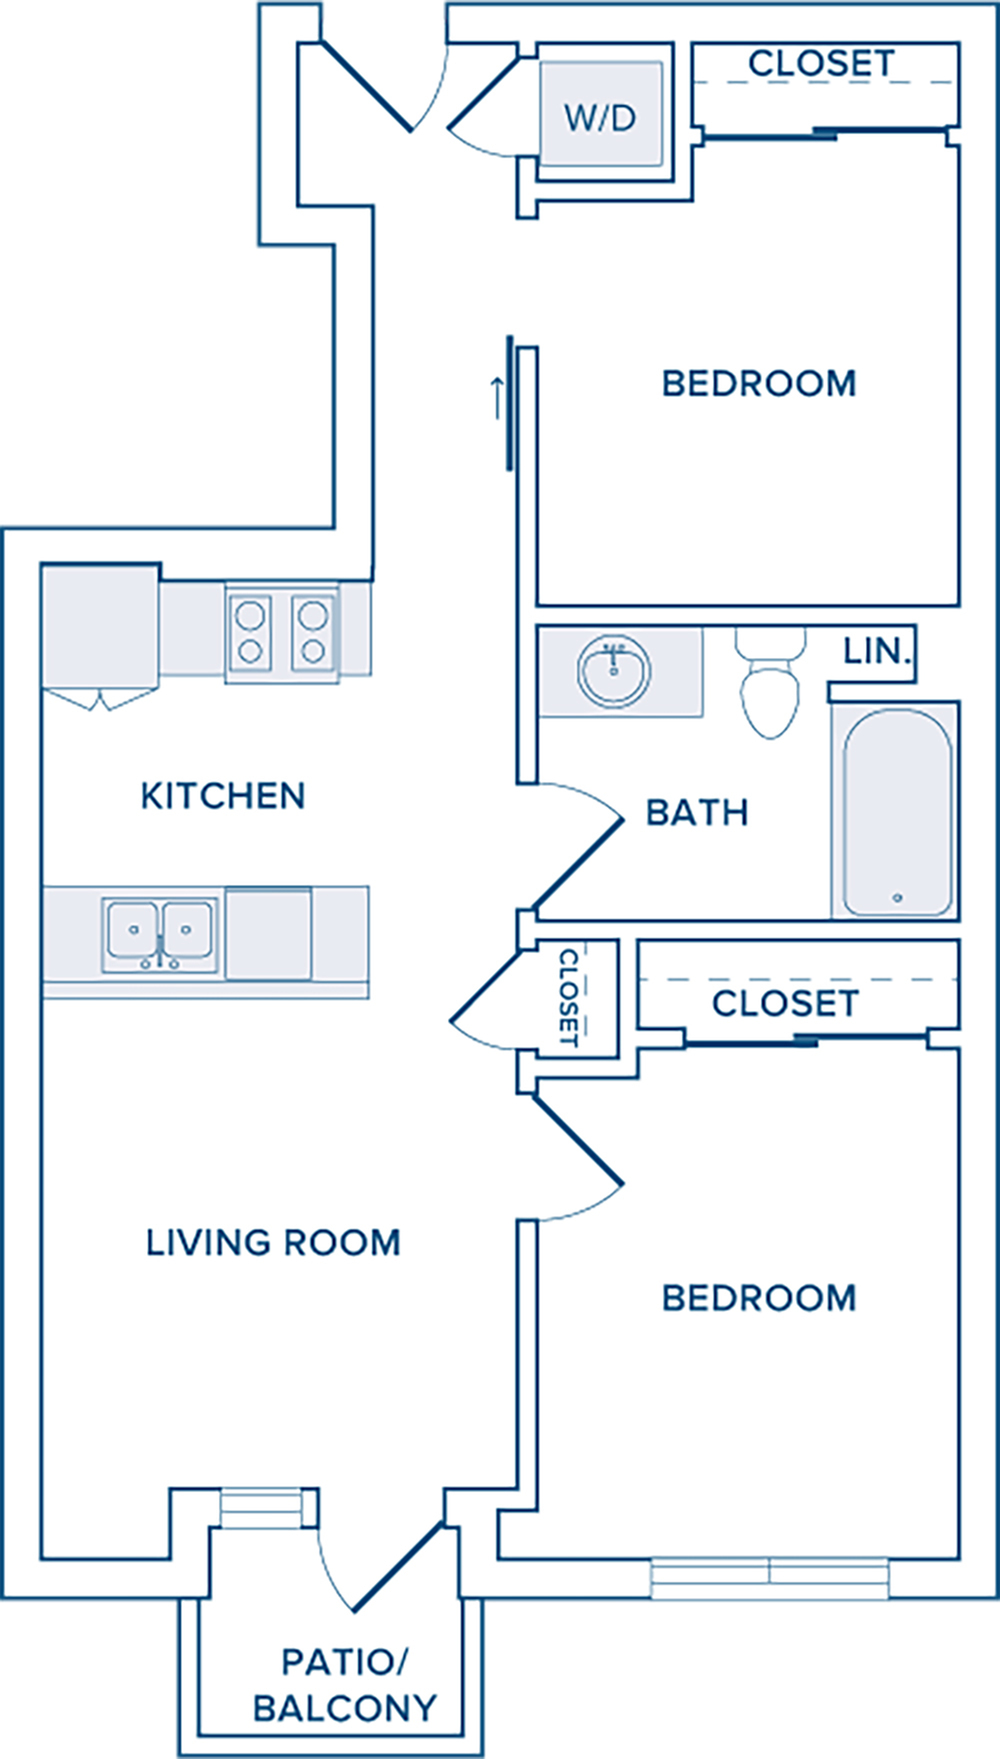 736 to 747 square foot two bedroom one bath apartment floorplan image